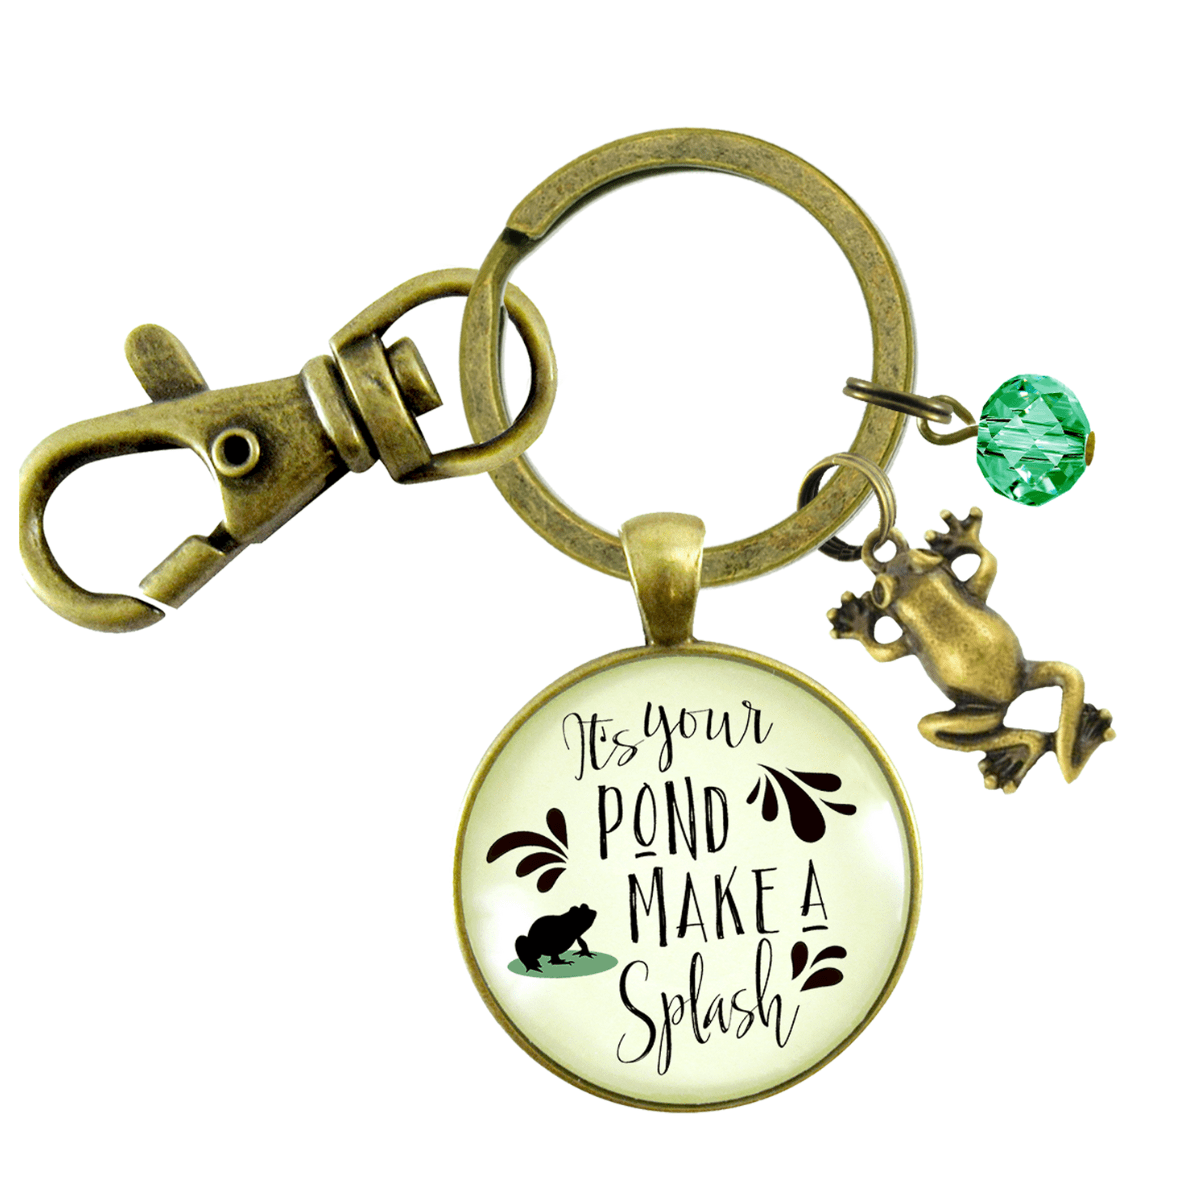 Frog Keychain It's Your Pond Make A Splash Success Life Quote Jewelry For Women - Gutsy Goodness